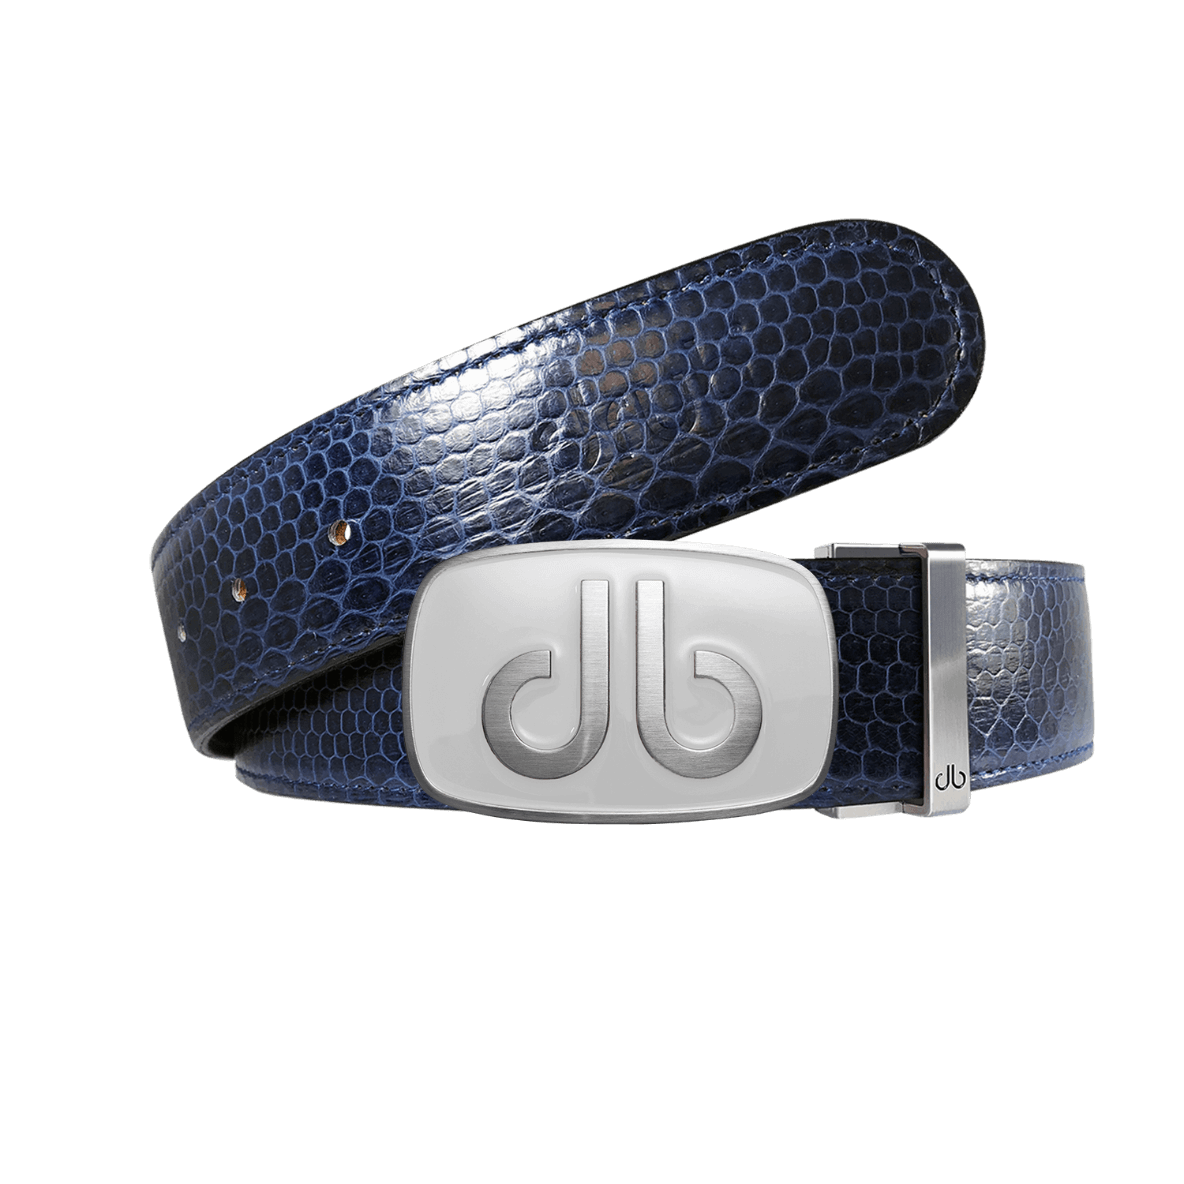 Blue Snakeskin Leather strap with Big white buckle